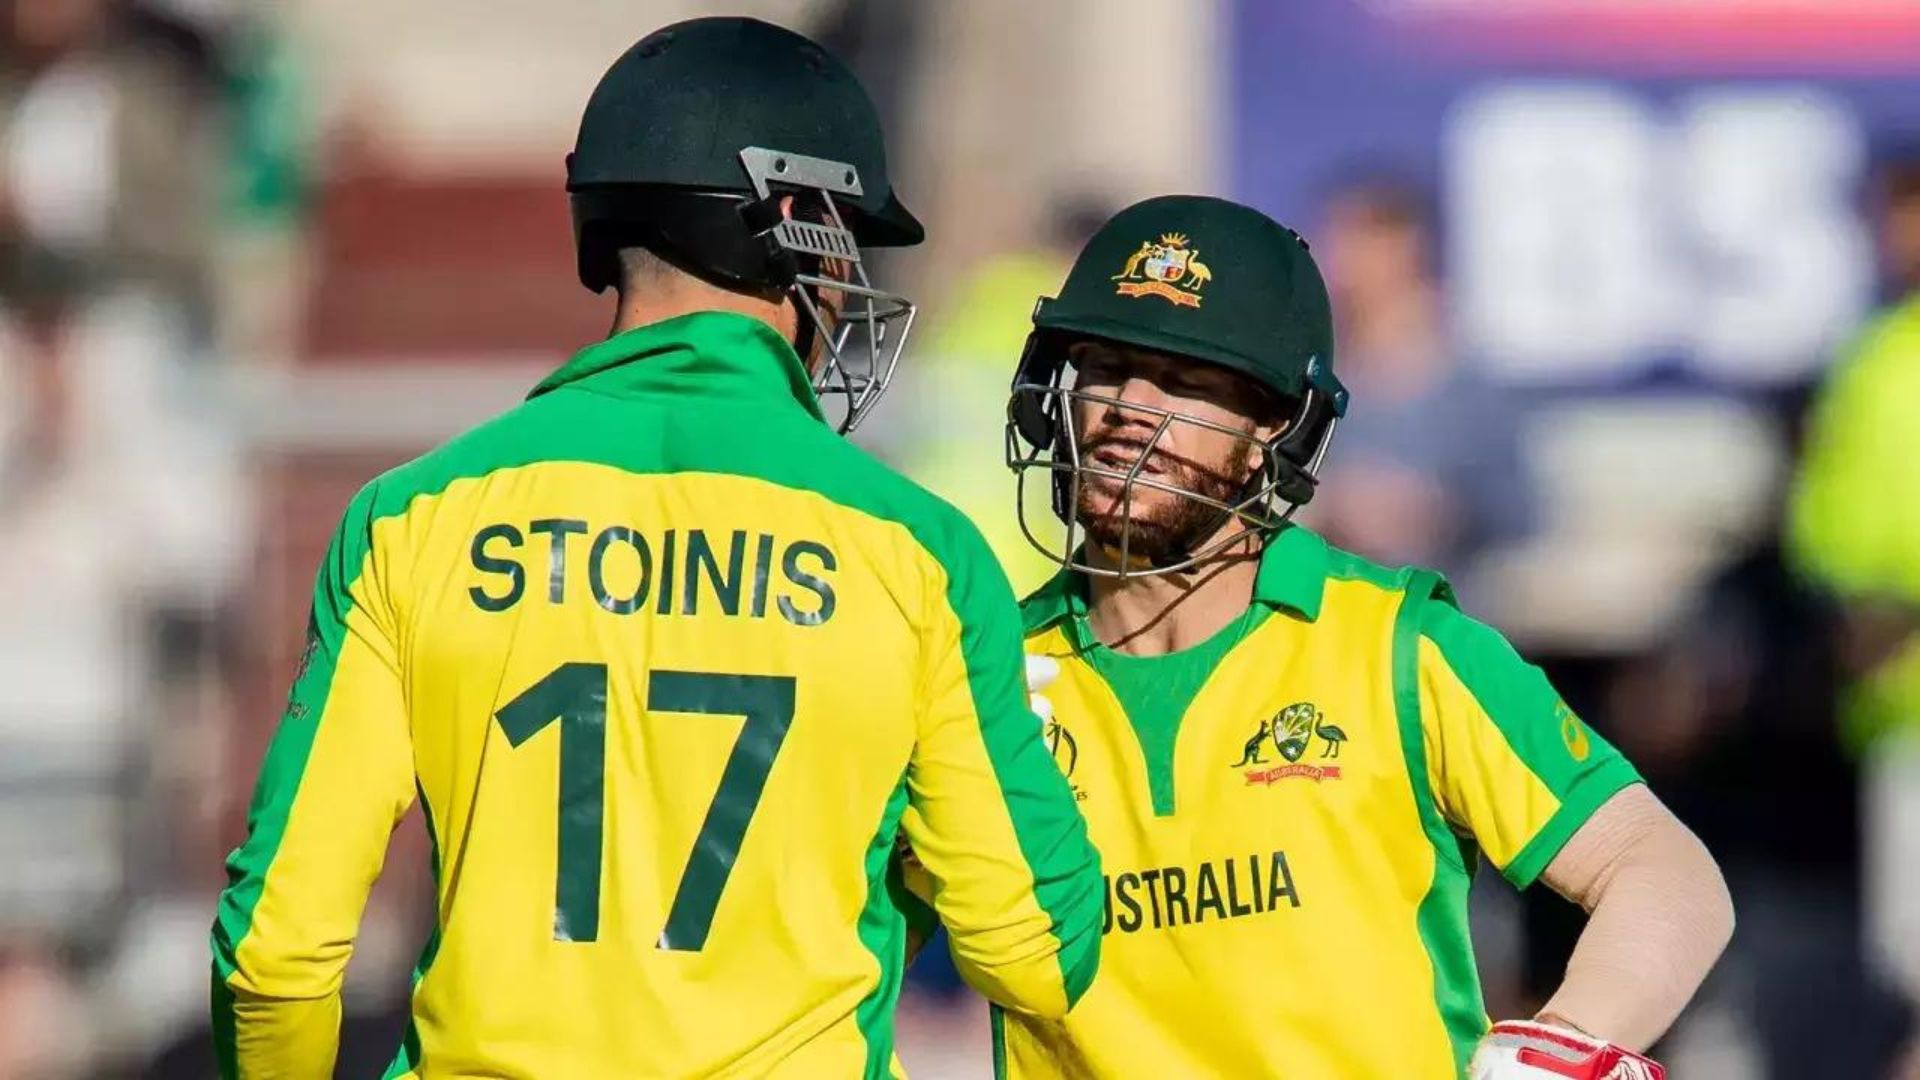 Marcus Stoinis Praises David Warner After Australia’s Victory: “He is class apart”